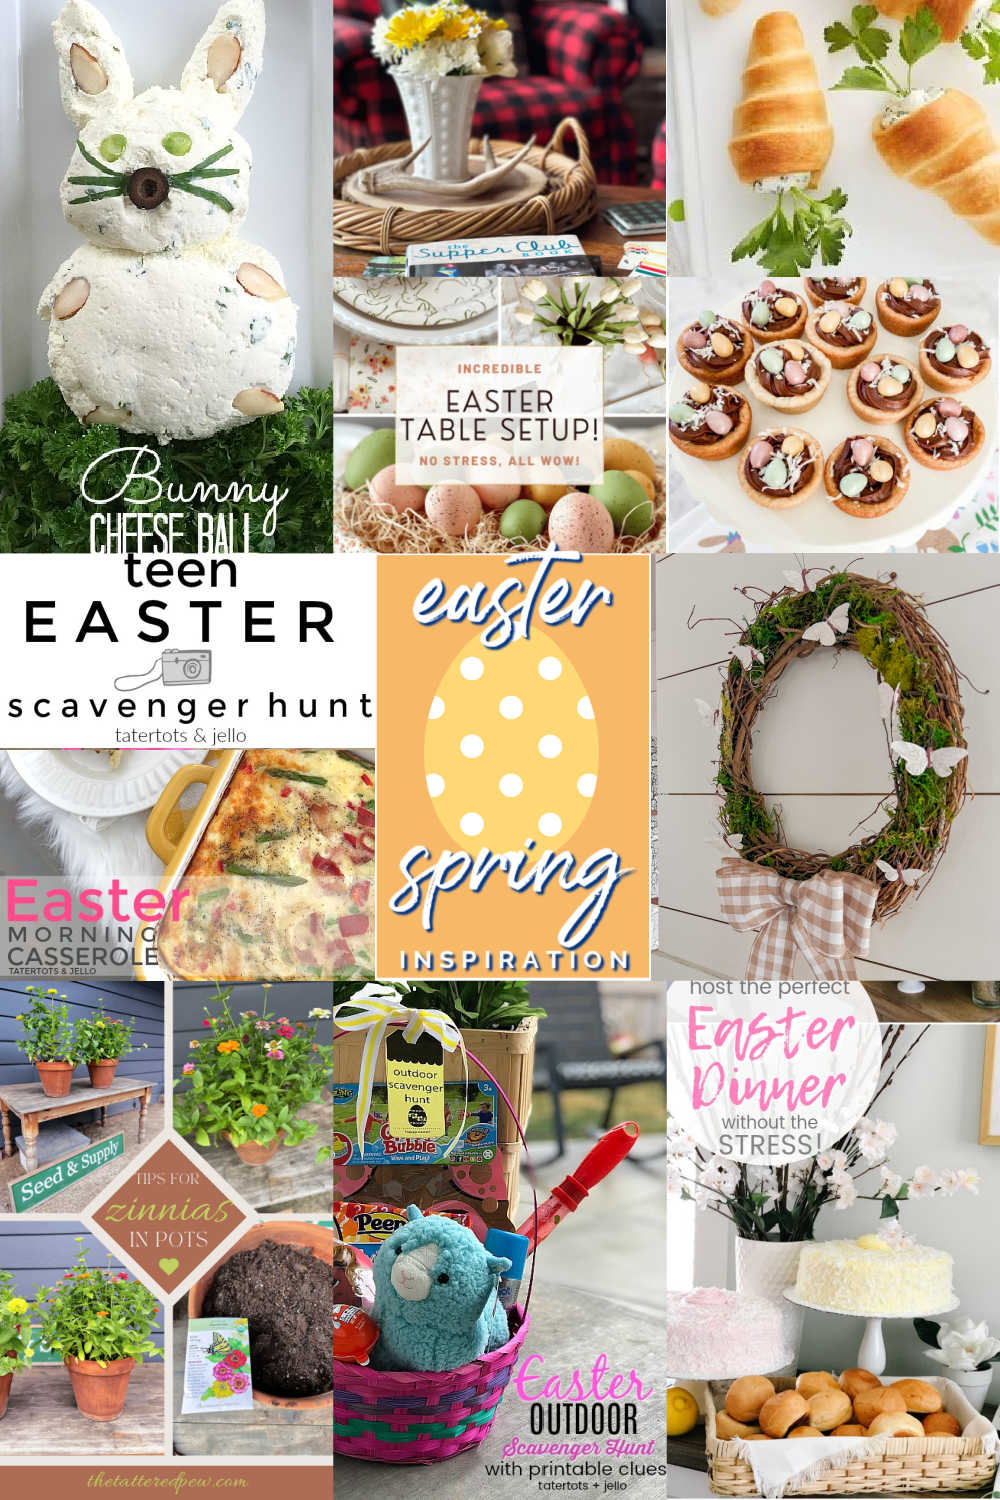 Spring and Easter Inspiration. The best Easter ideas, including egg decorating, recipes, tablescapes, basket ideas, and last-minute touches,to make your Easter celebration extra special.